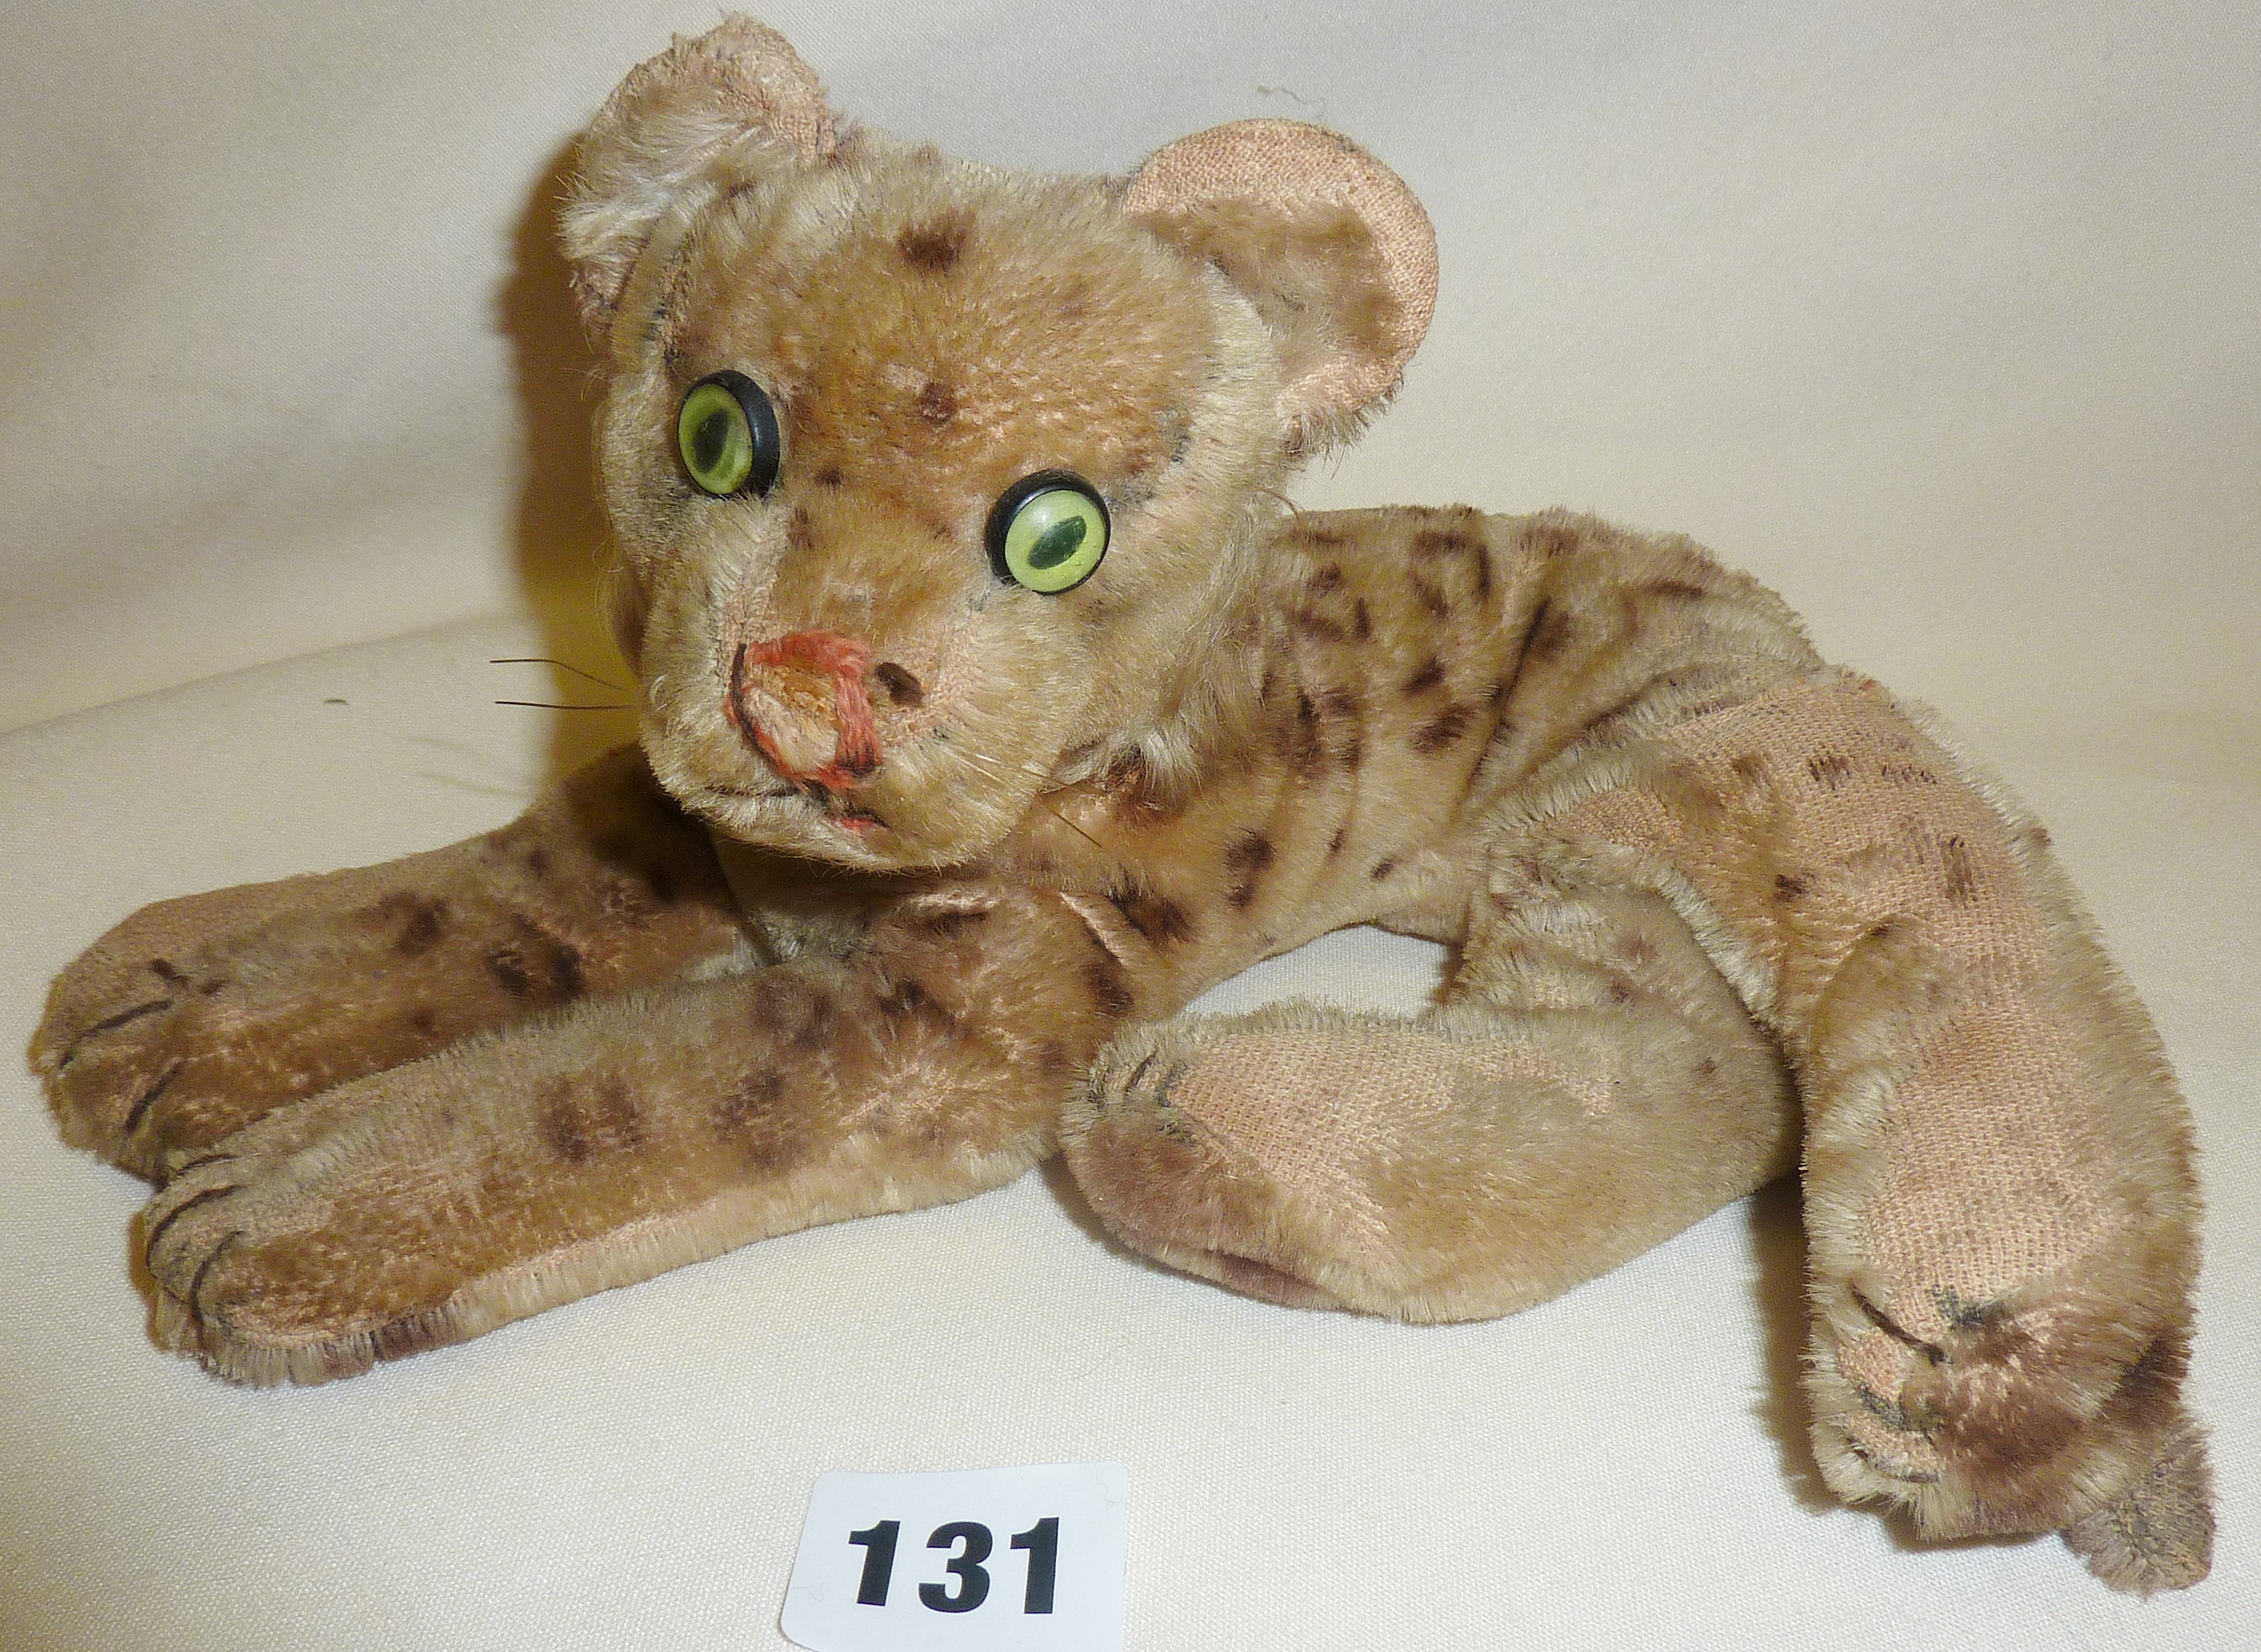 Vintage leopard with green eyes stuffed toy, possibly Steiff